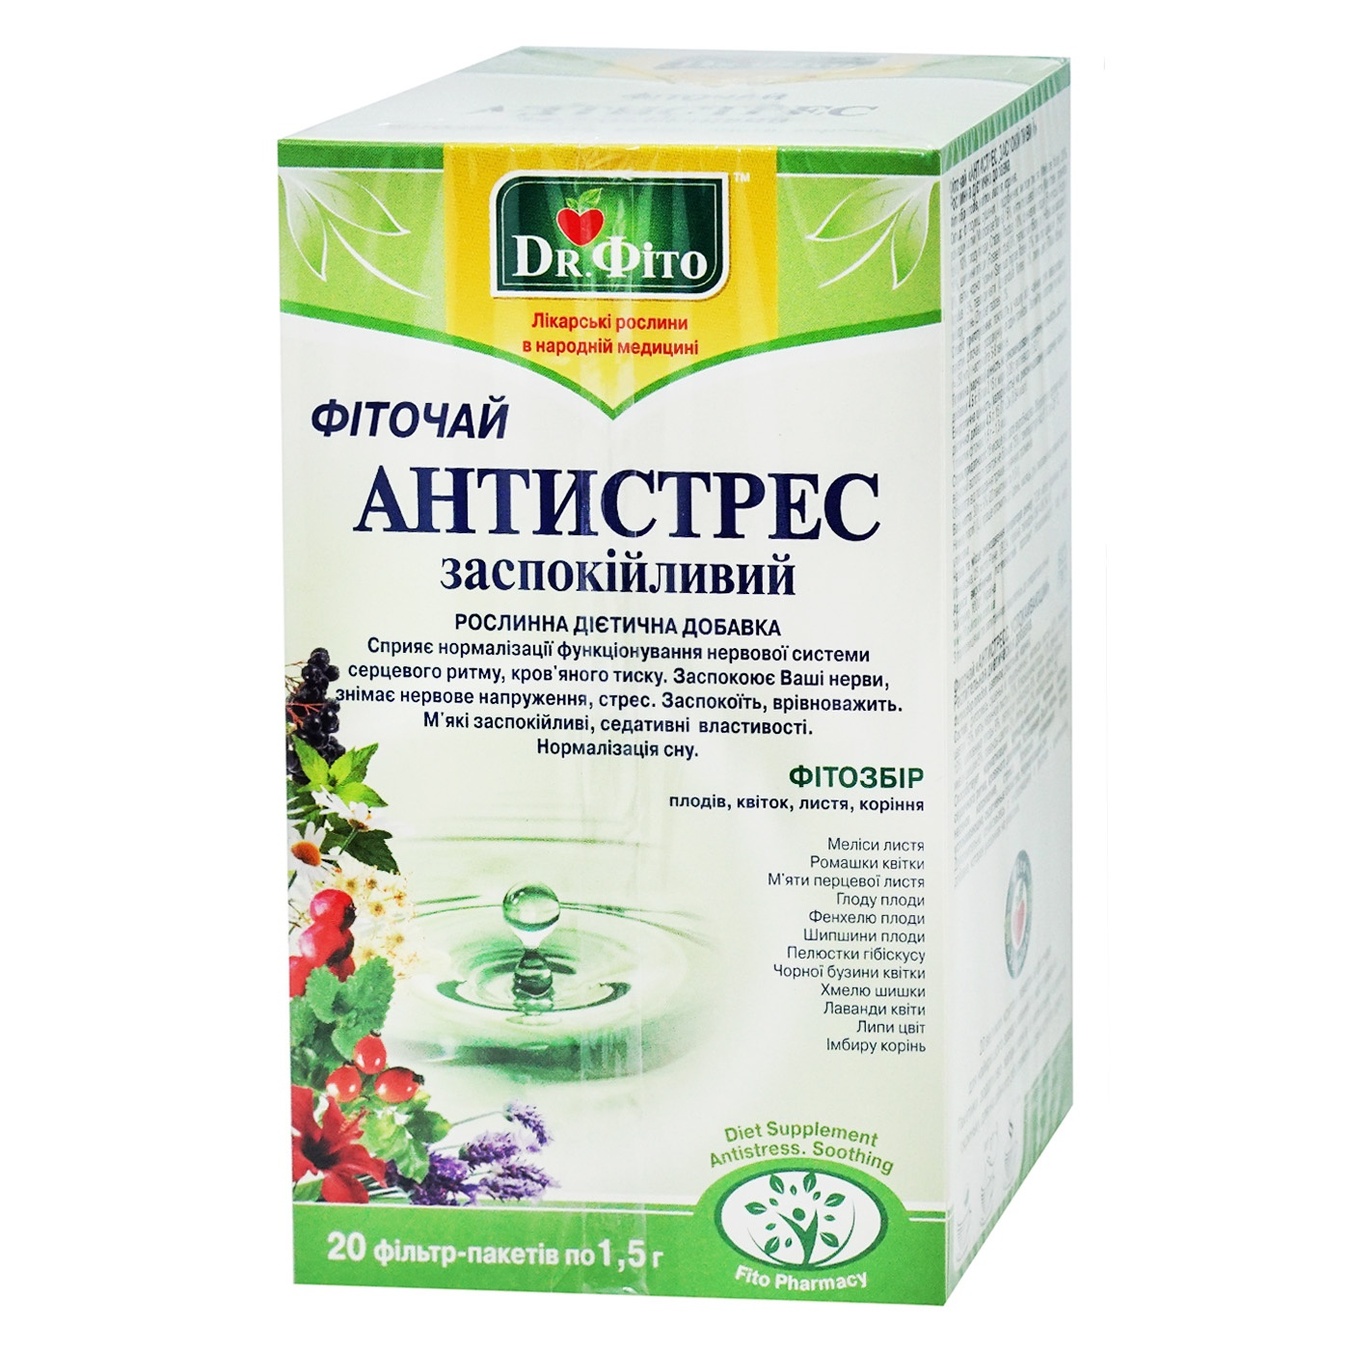 Phytochai Dr. Phyto herbal soothing 1.5g*20pcs 30g